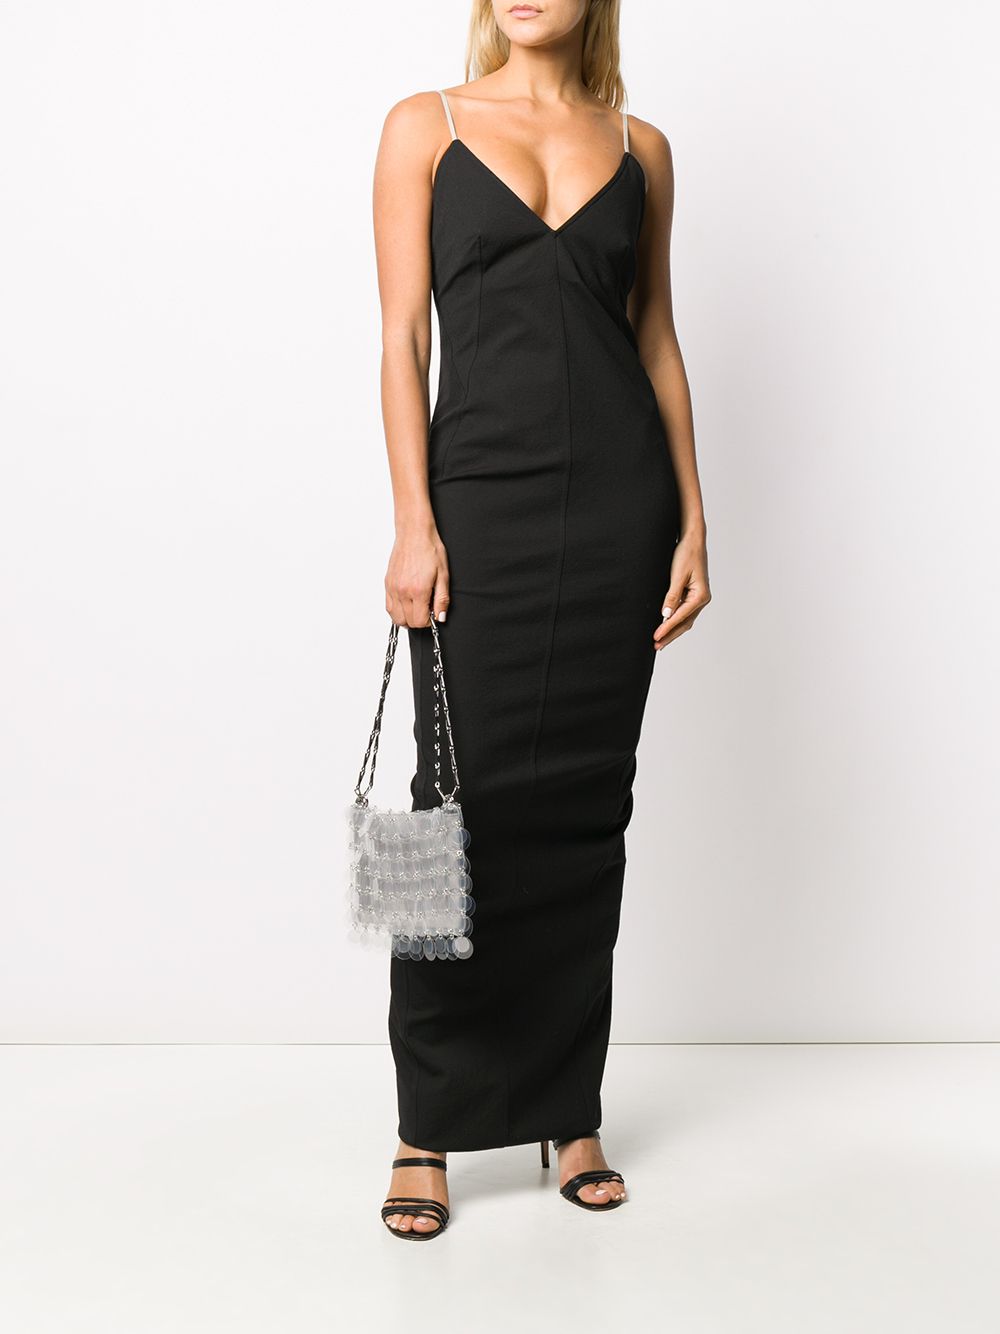 Rick Owens Fitted Backless Dress - Farfetch